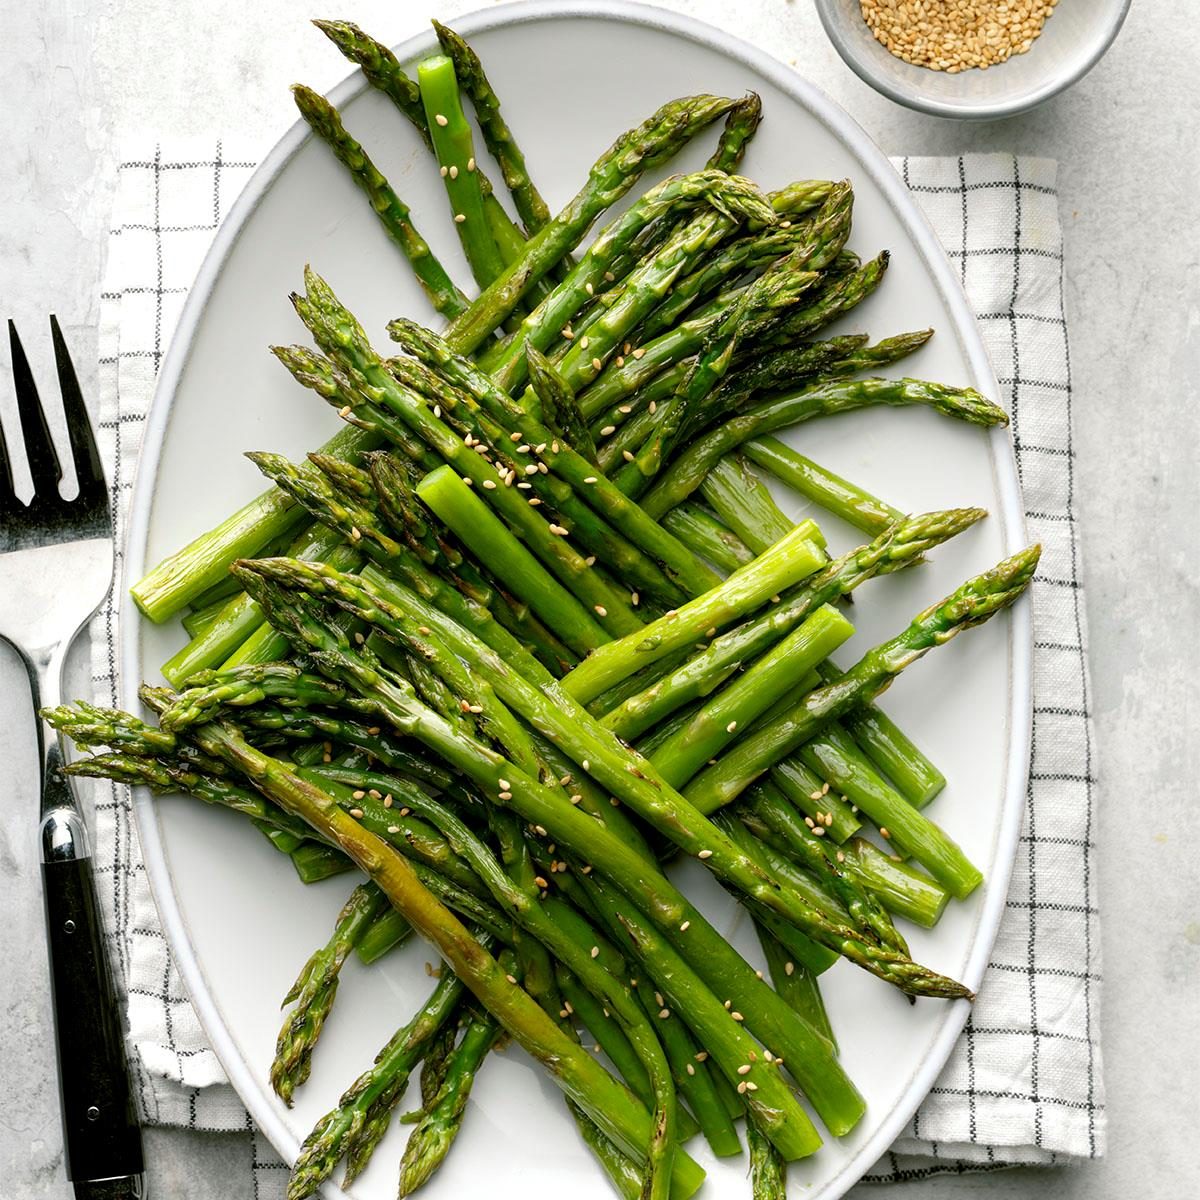 Roasted Asparagus Recipe: How to Make It